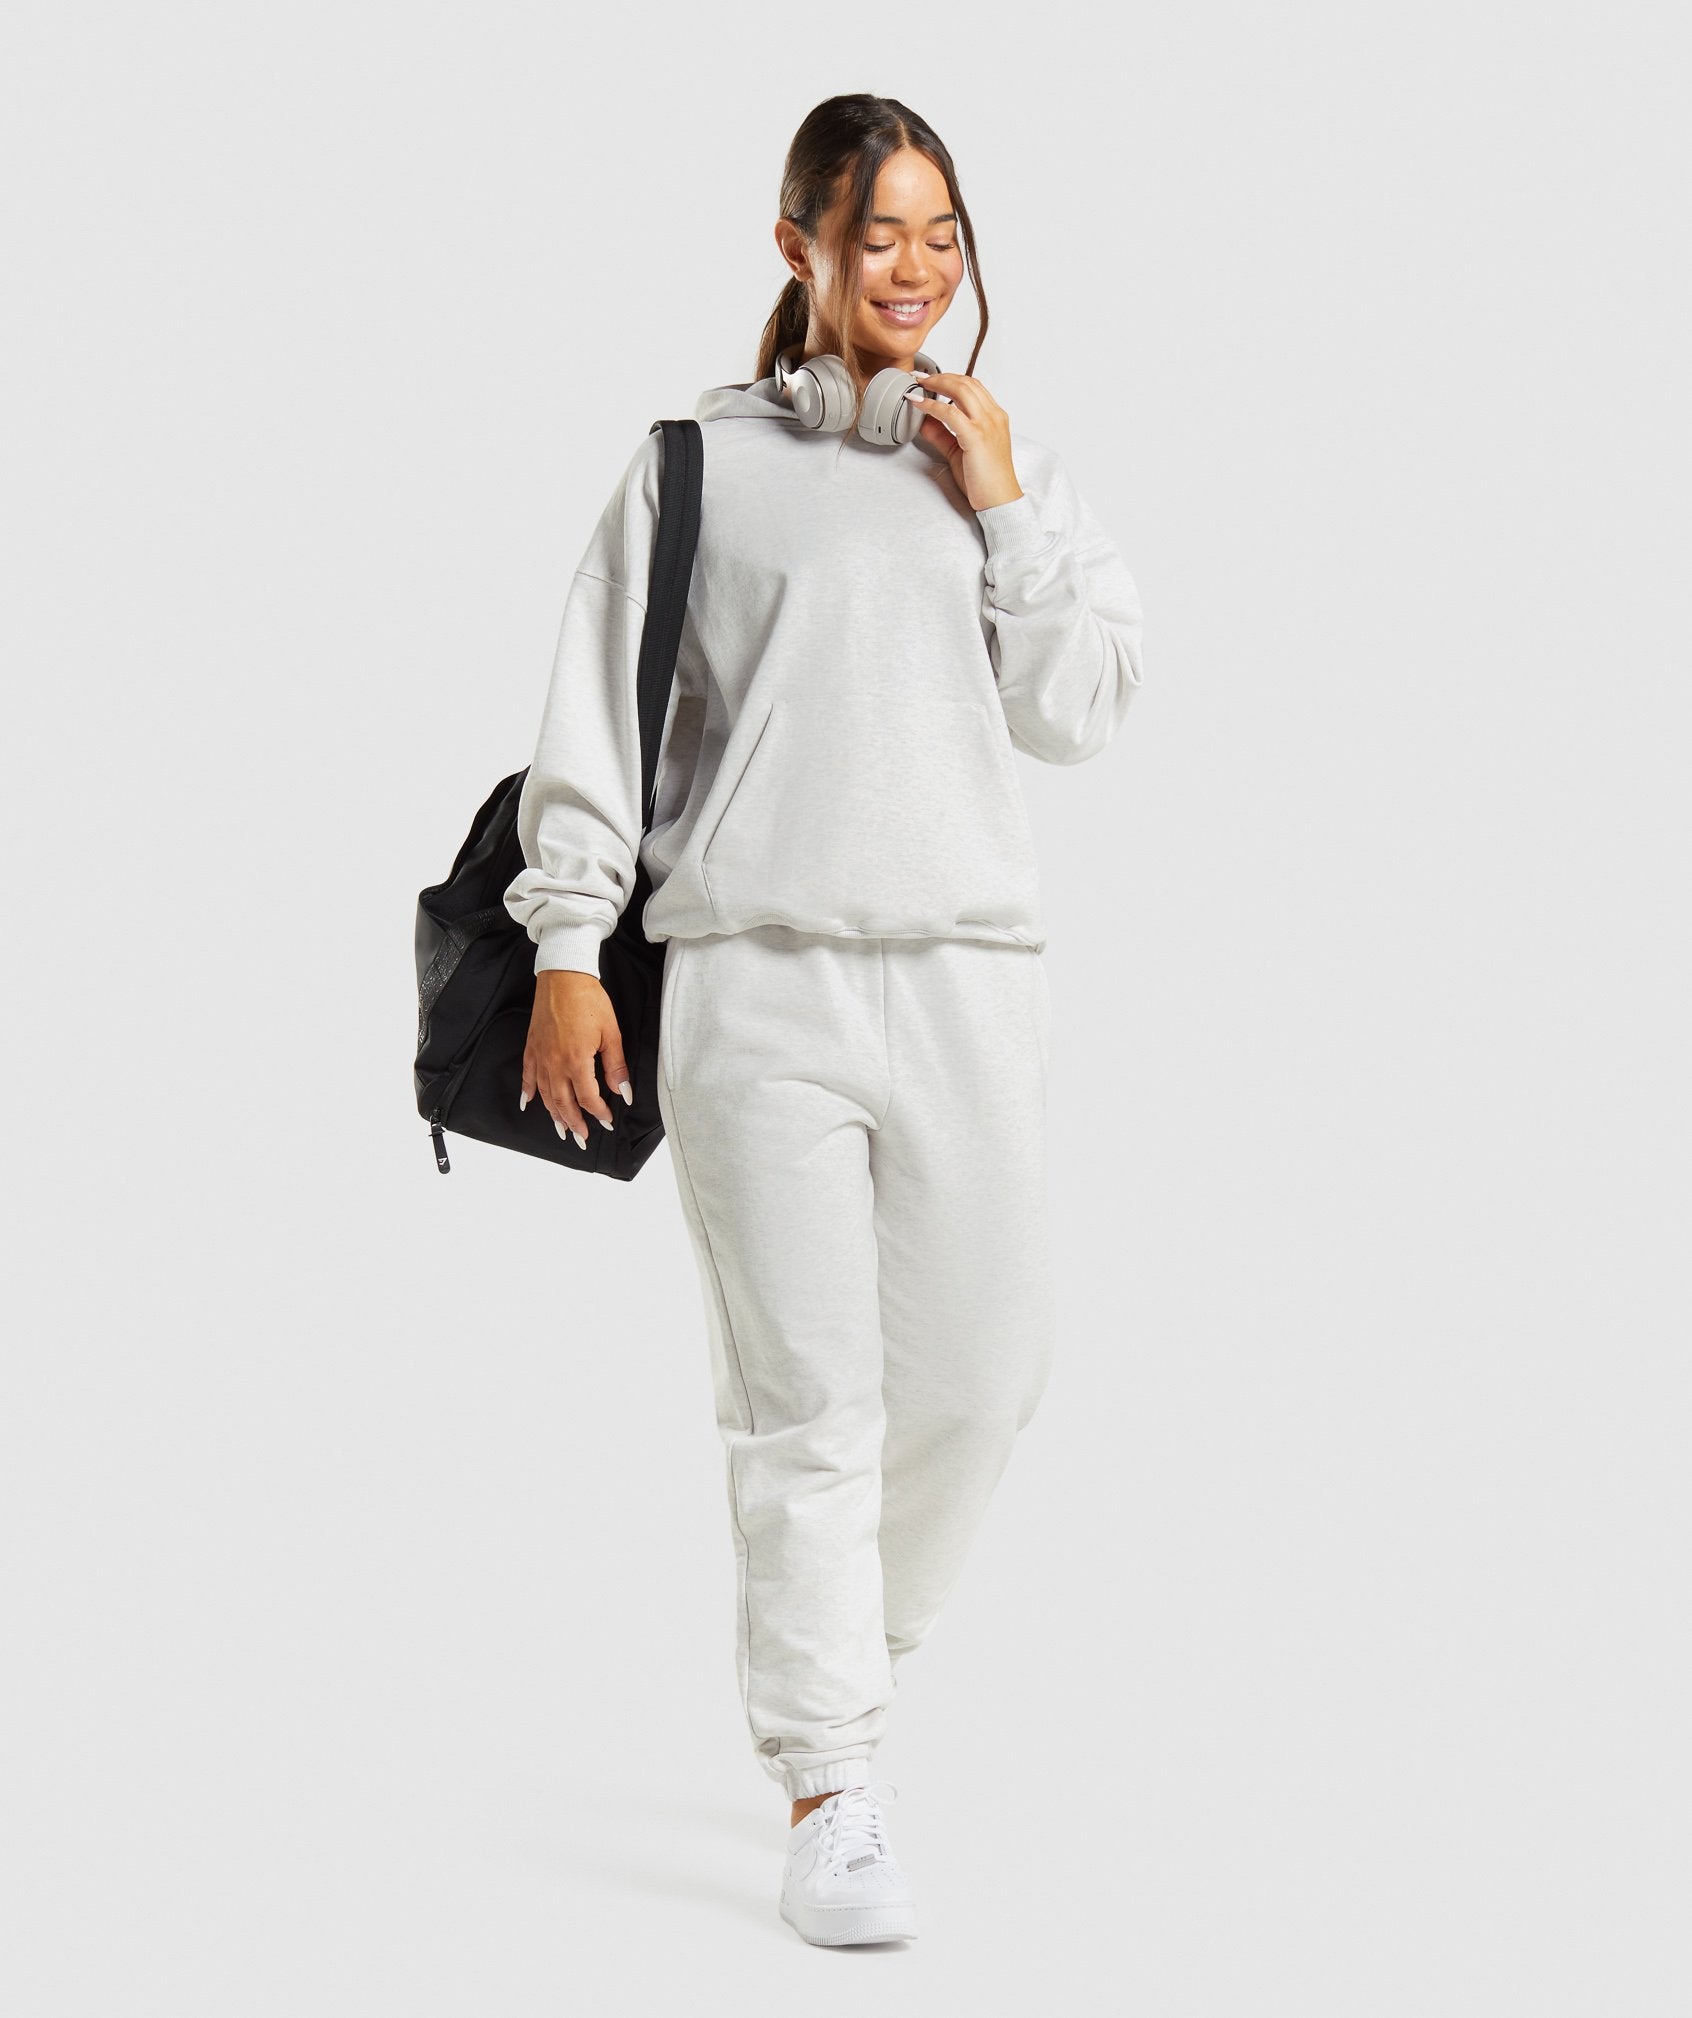 Rest Day Sweats Hoodie in White Marl - view 4